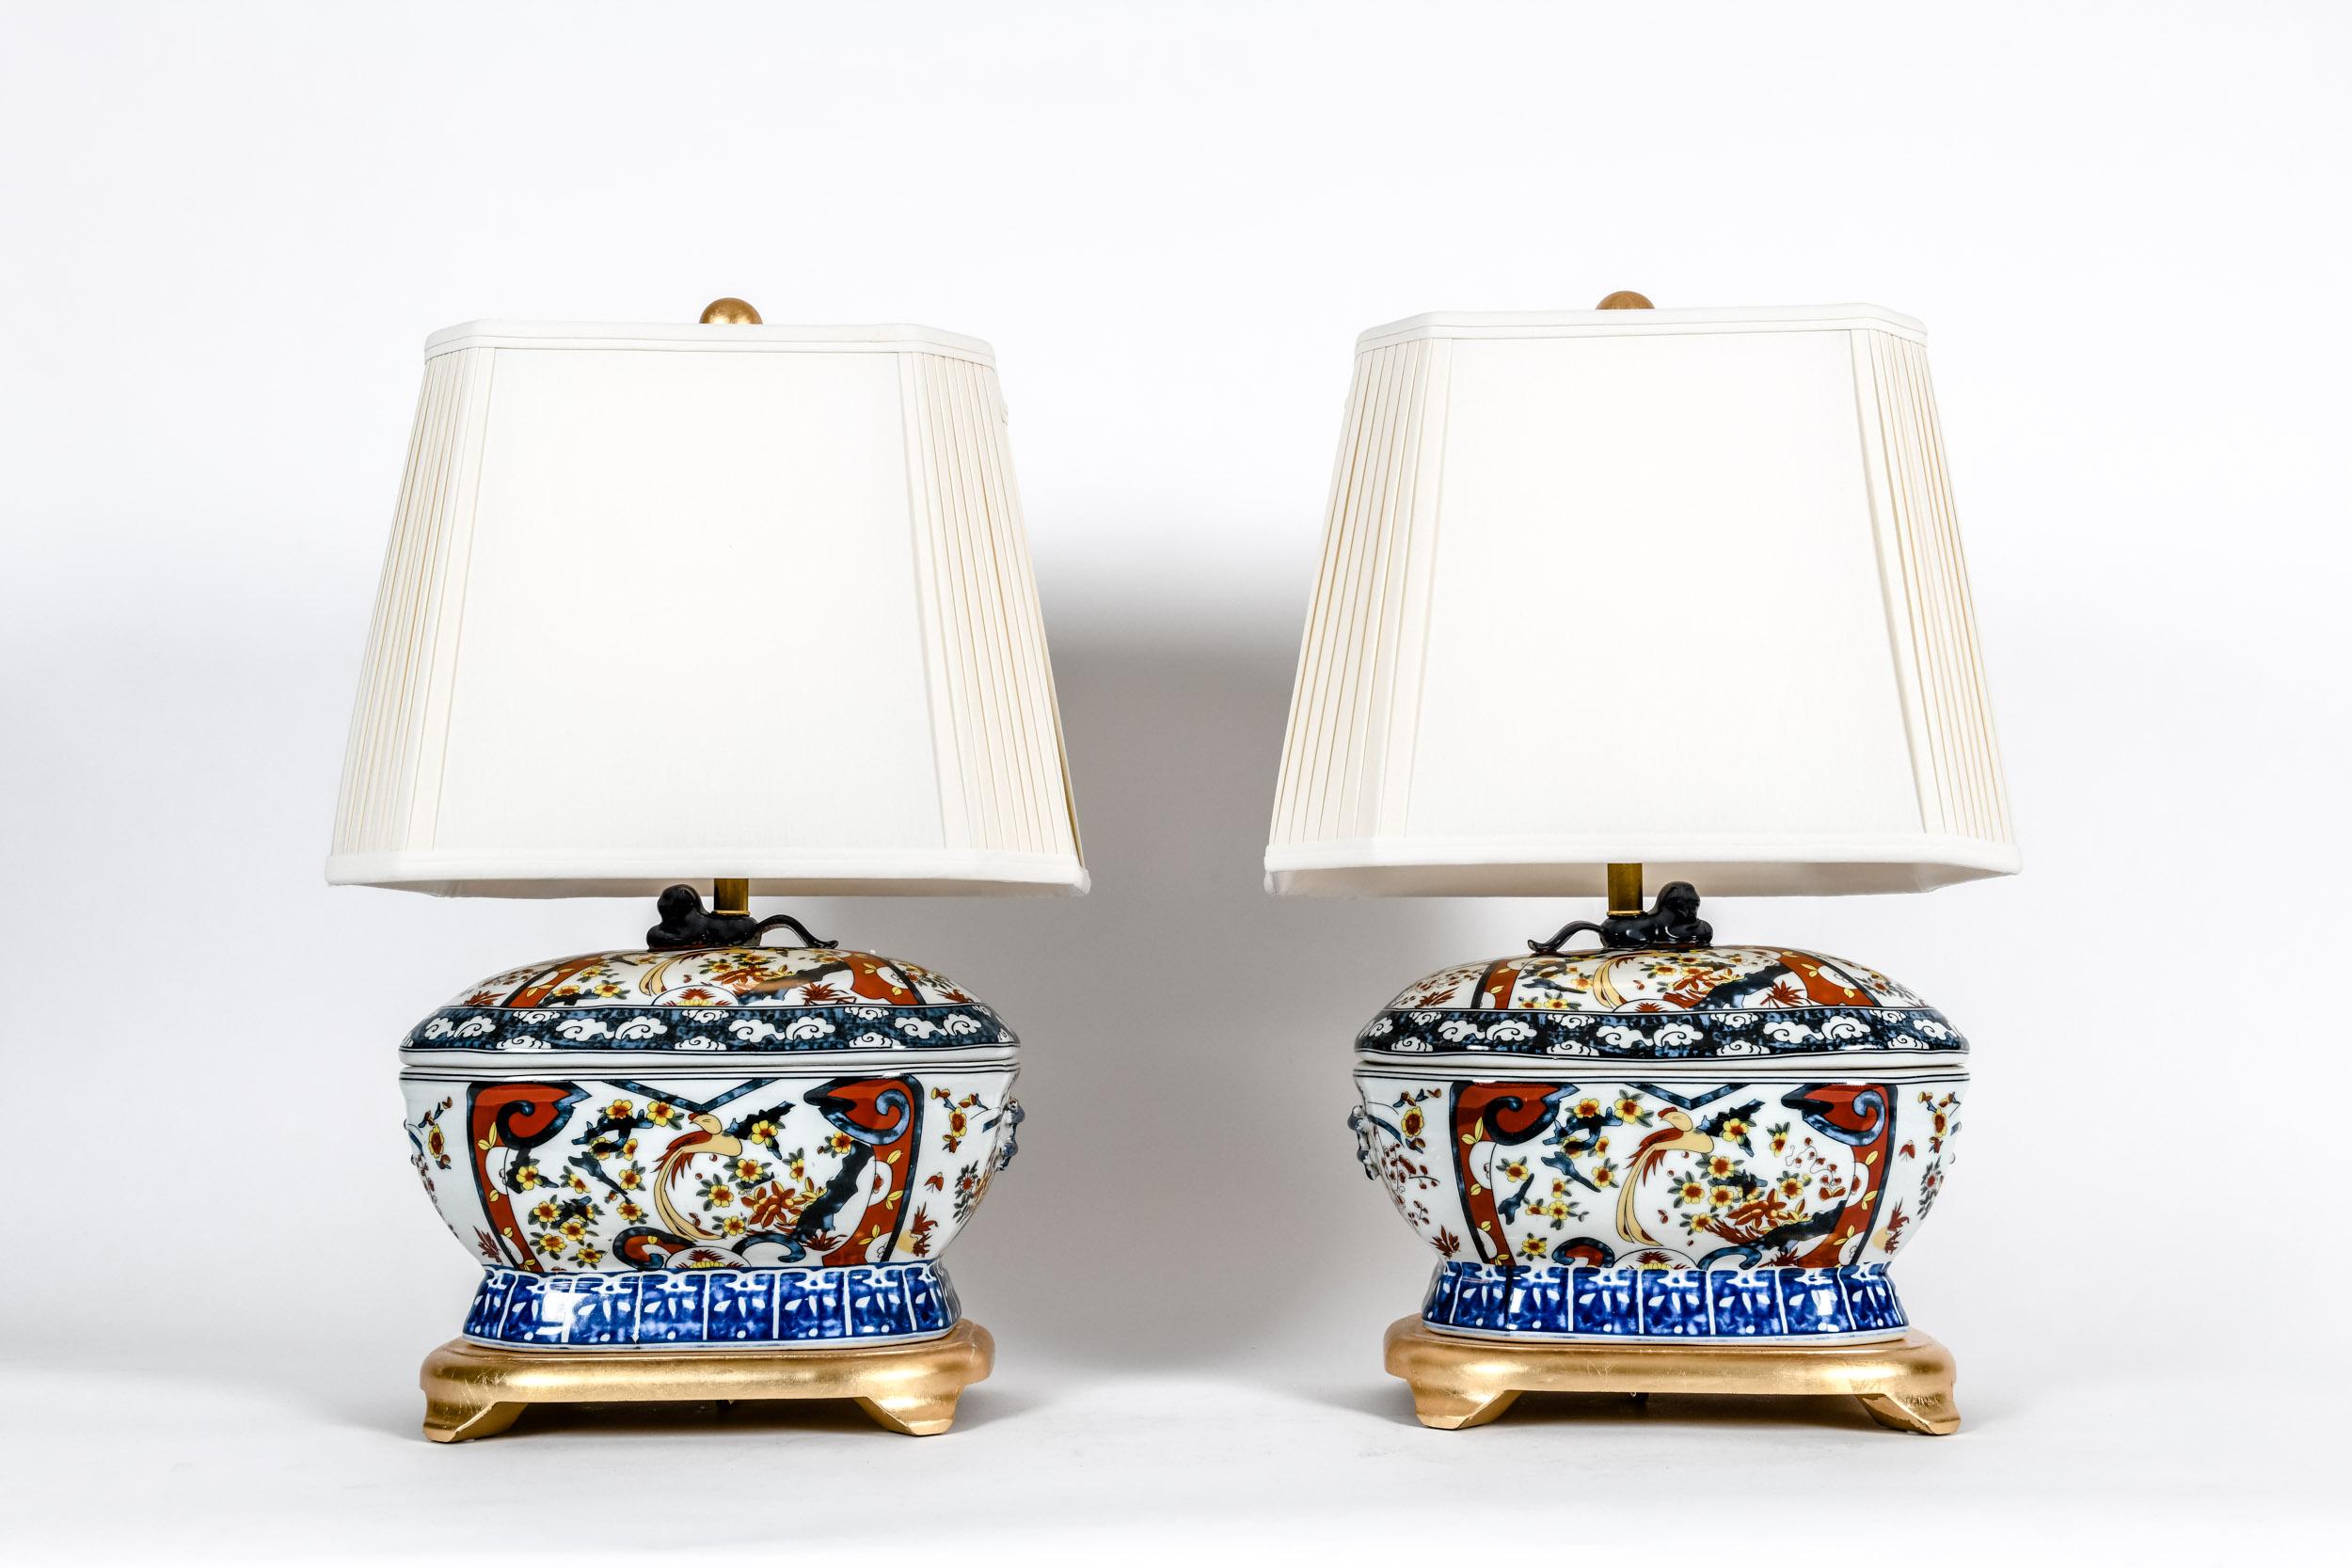 French porcelain, pair late 20th century table lamps with footed giltwood base. Each lamp is in excellent working condition, minor wear consistent with use or age. Measures: Each comes with a pleated silk shade size 11 inches tall x 11.5 inches top